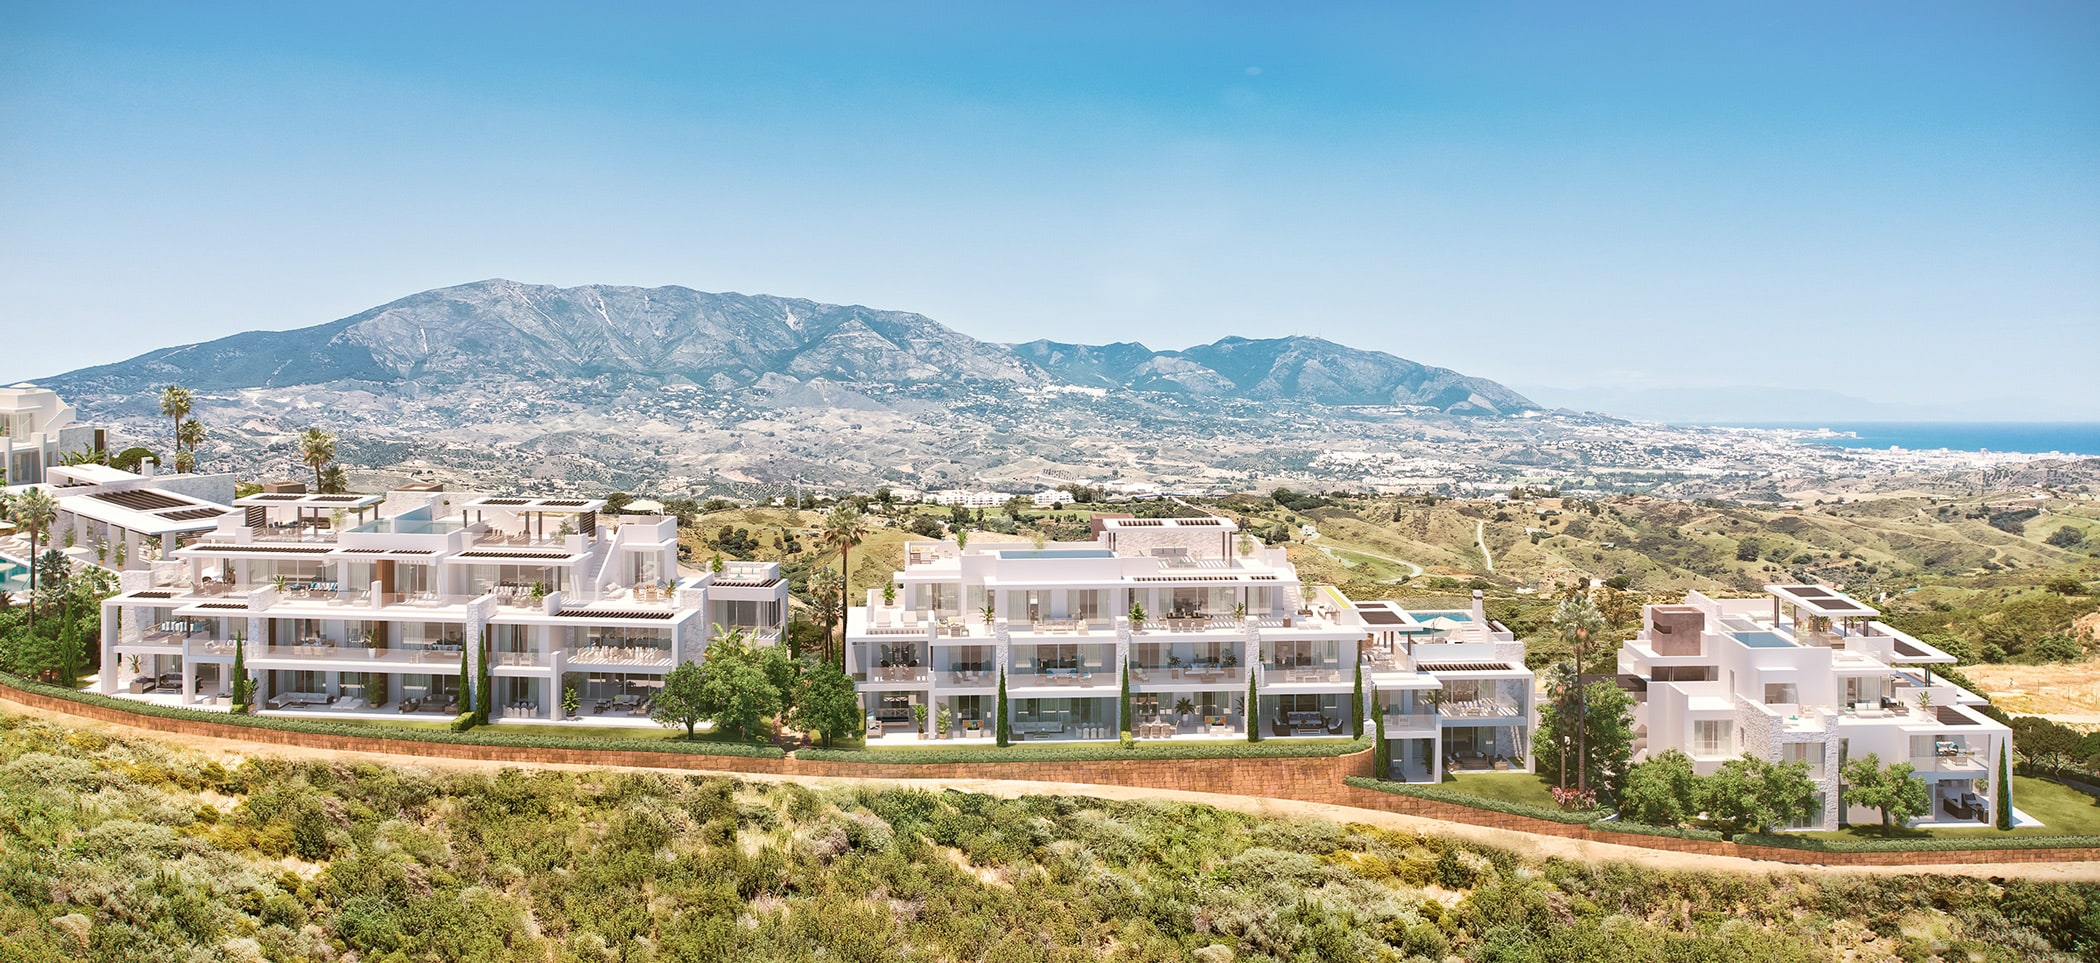 44 apartments in Marbella with sea views bordering a protected nature area